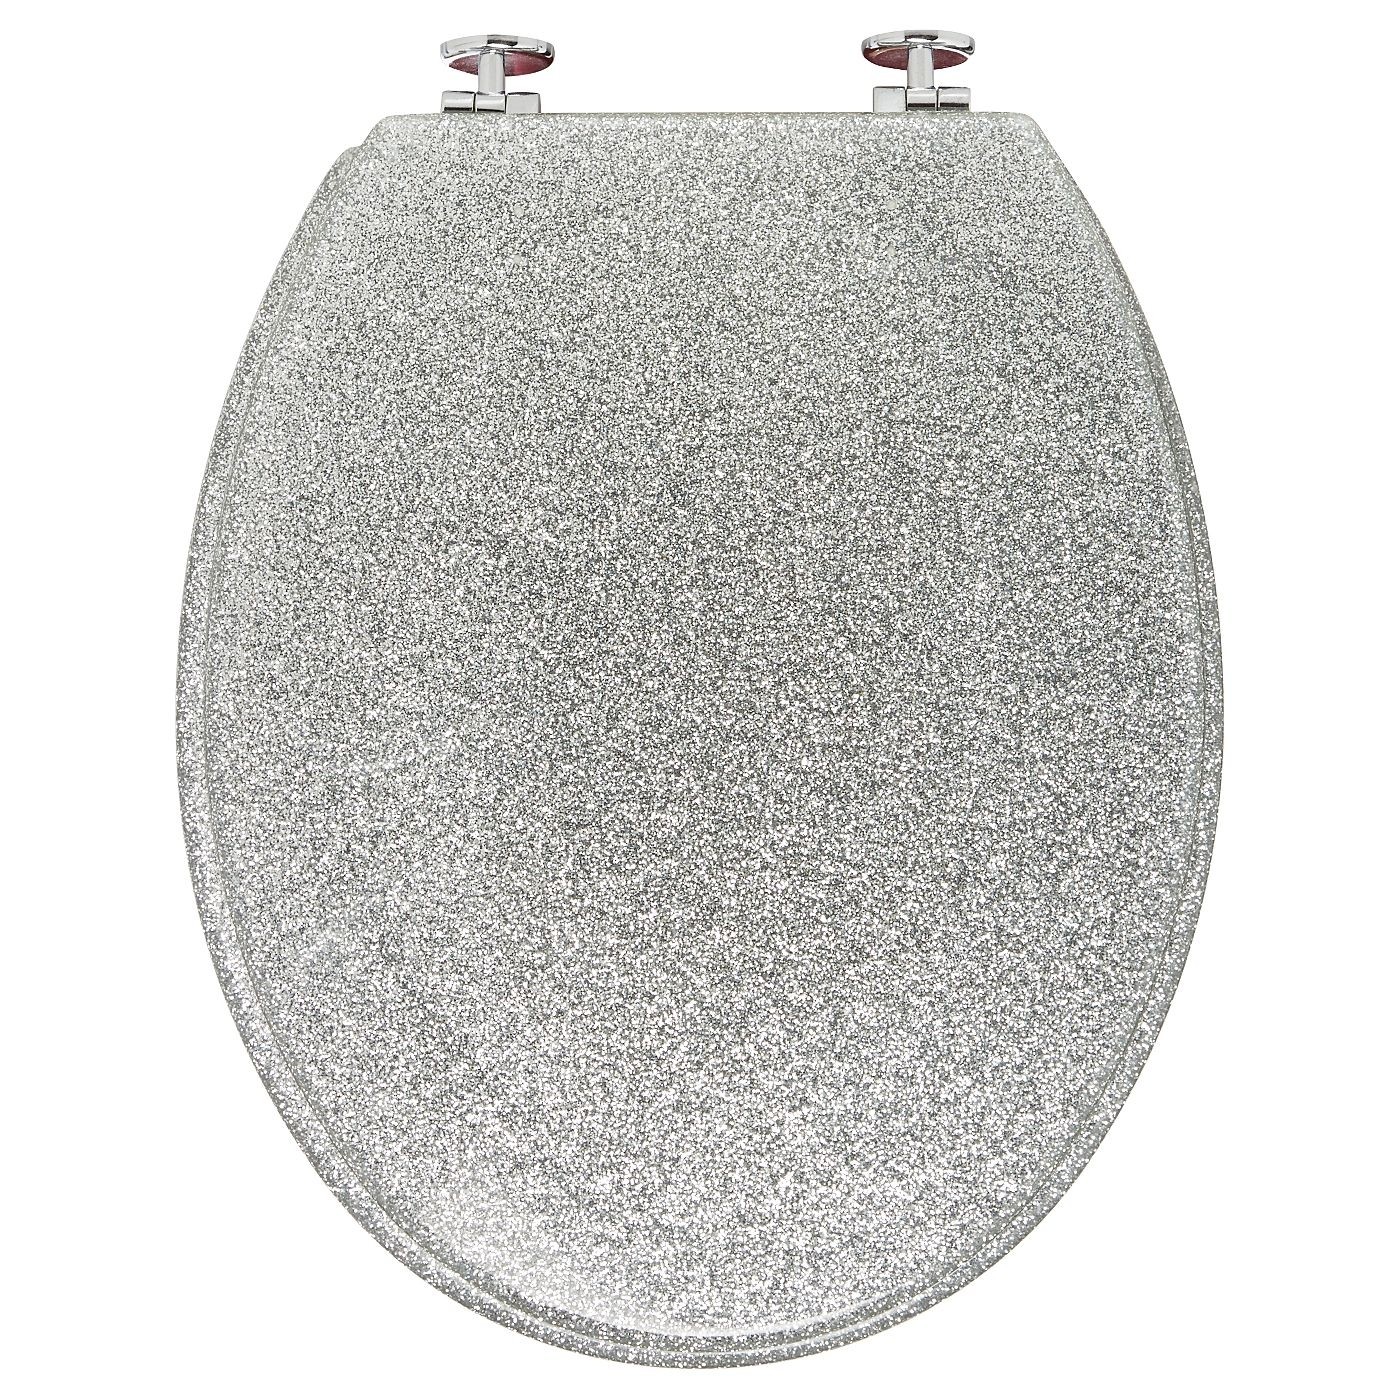 Decorated toilet seats